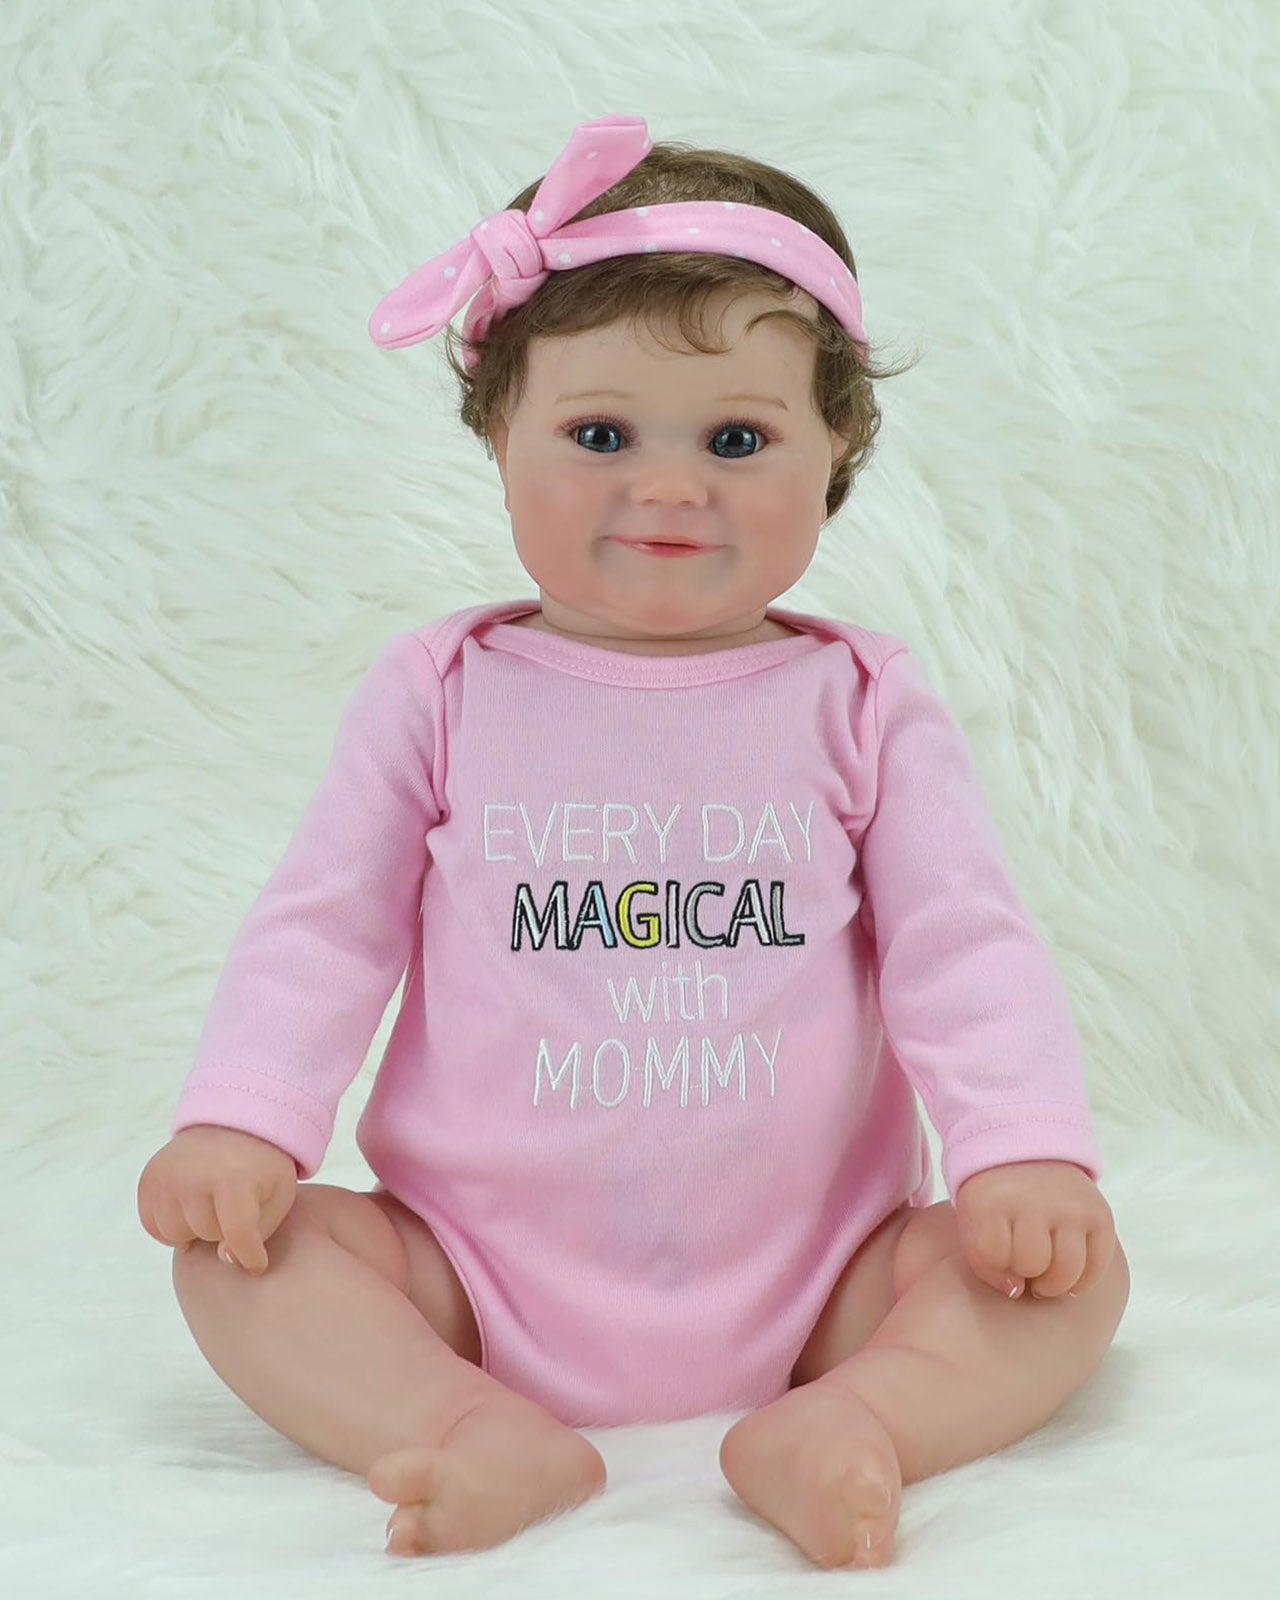 Elly - 20" Reborn Baby Dolls Look Real Newborn Girl With Sweet Smile